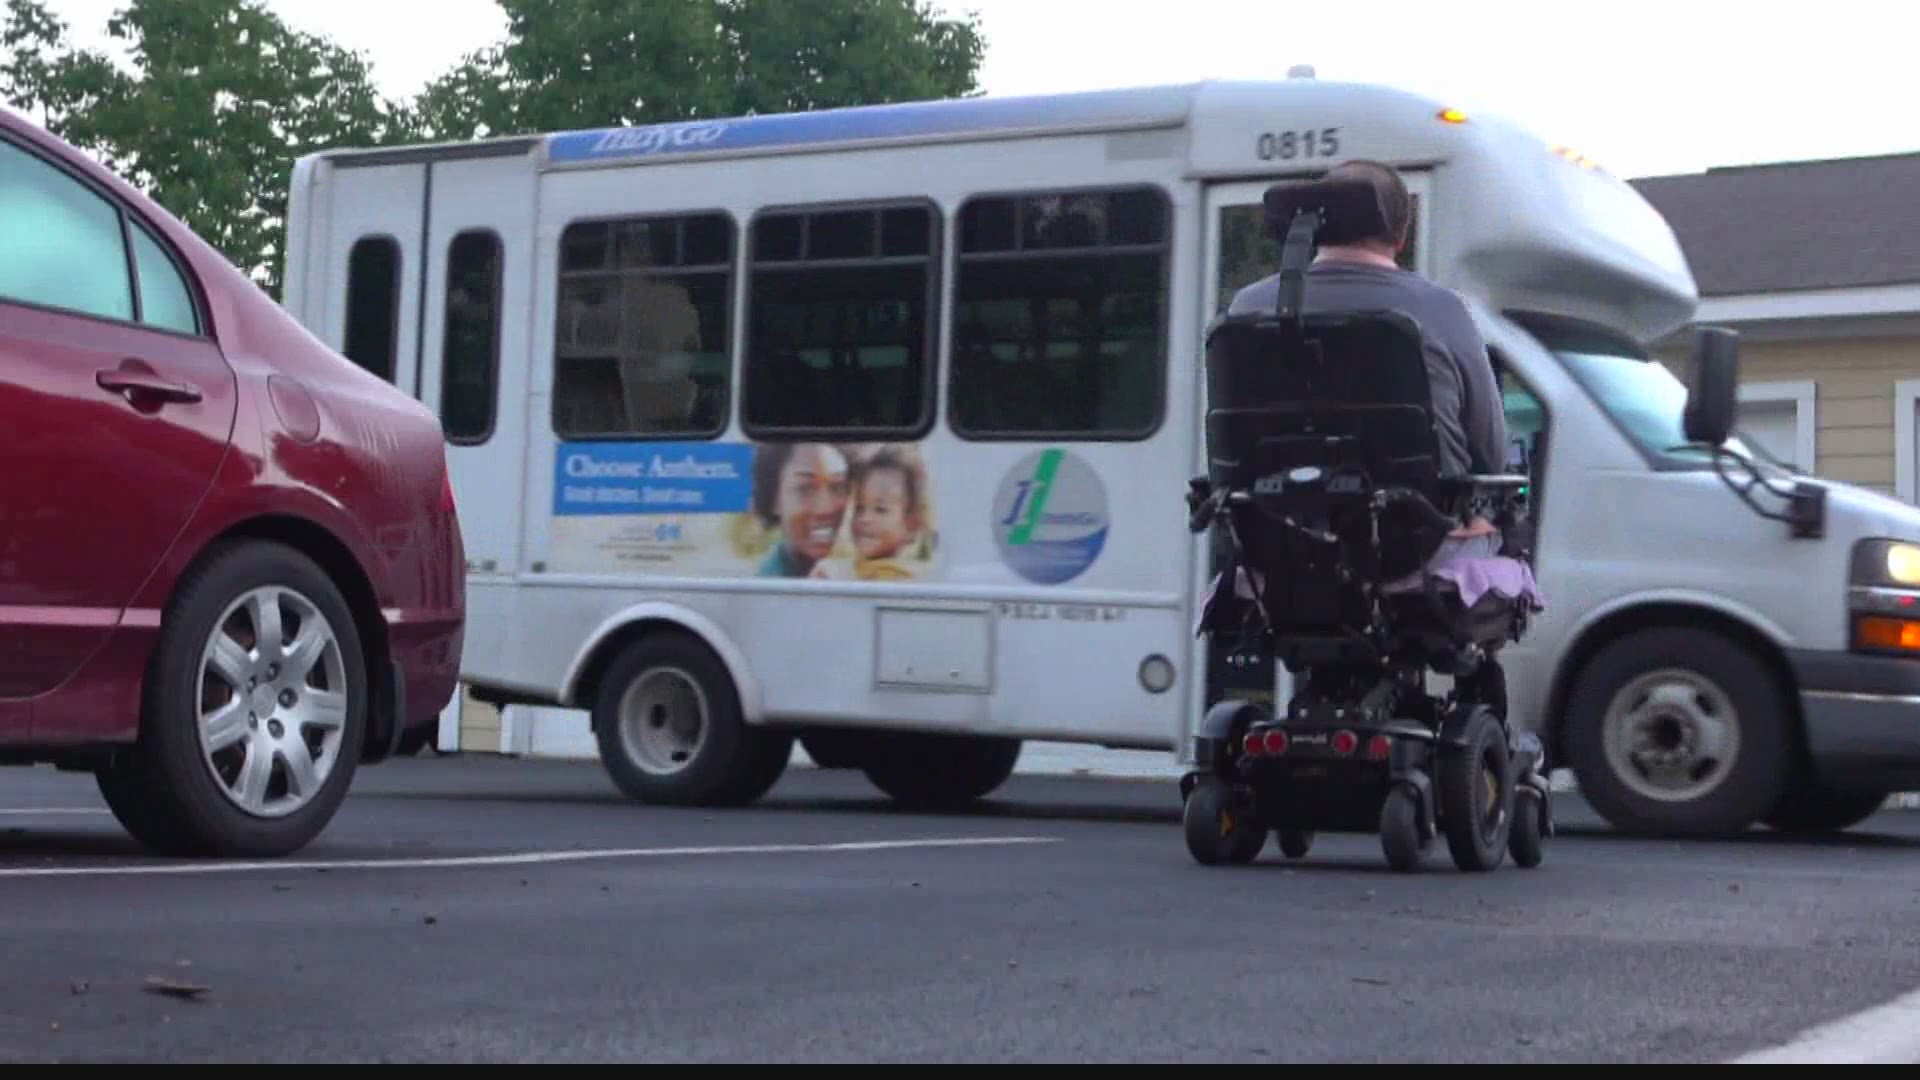 There are big changes coming for people who rely on IndyGo’s paratransit bus service, 13 Investigates has learned.